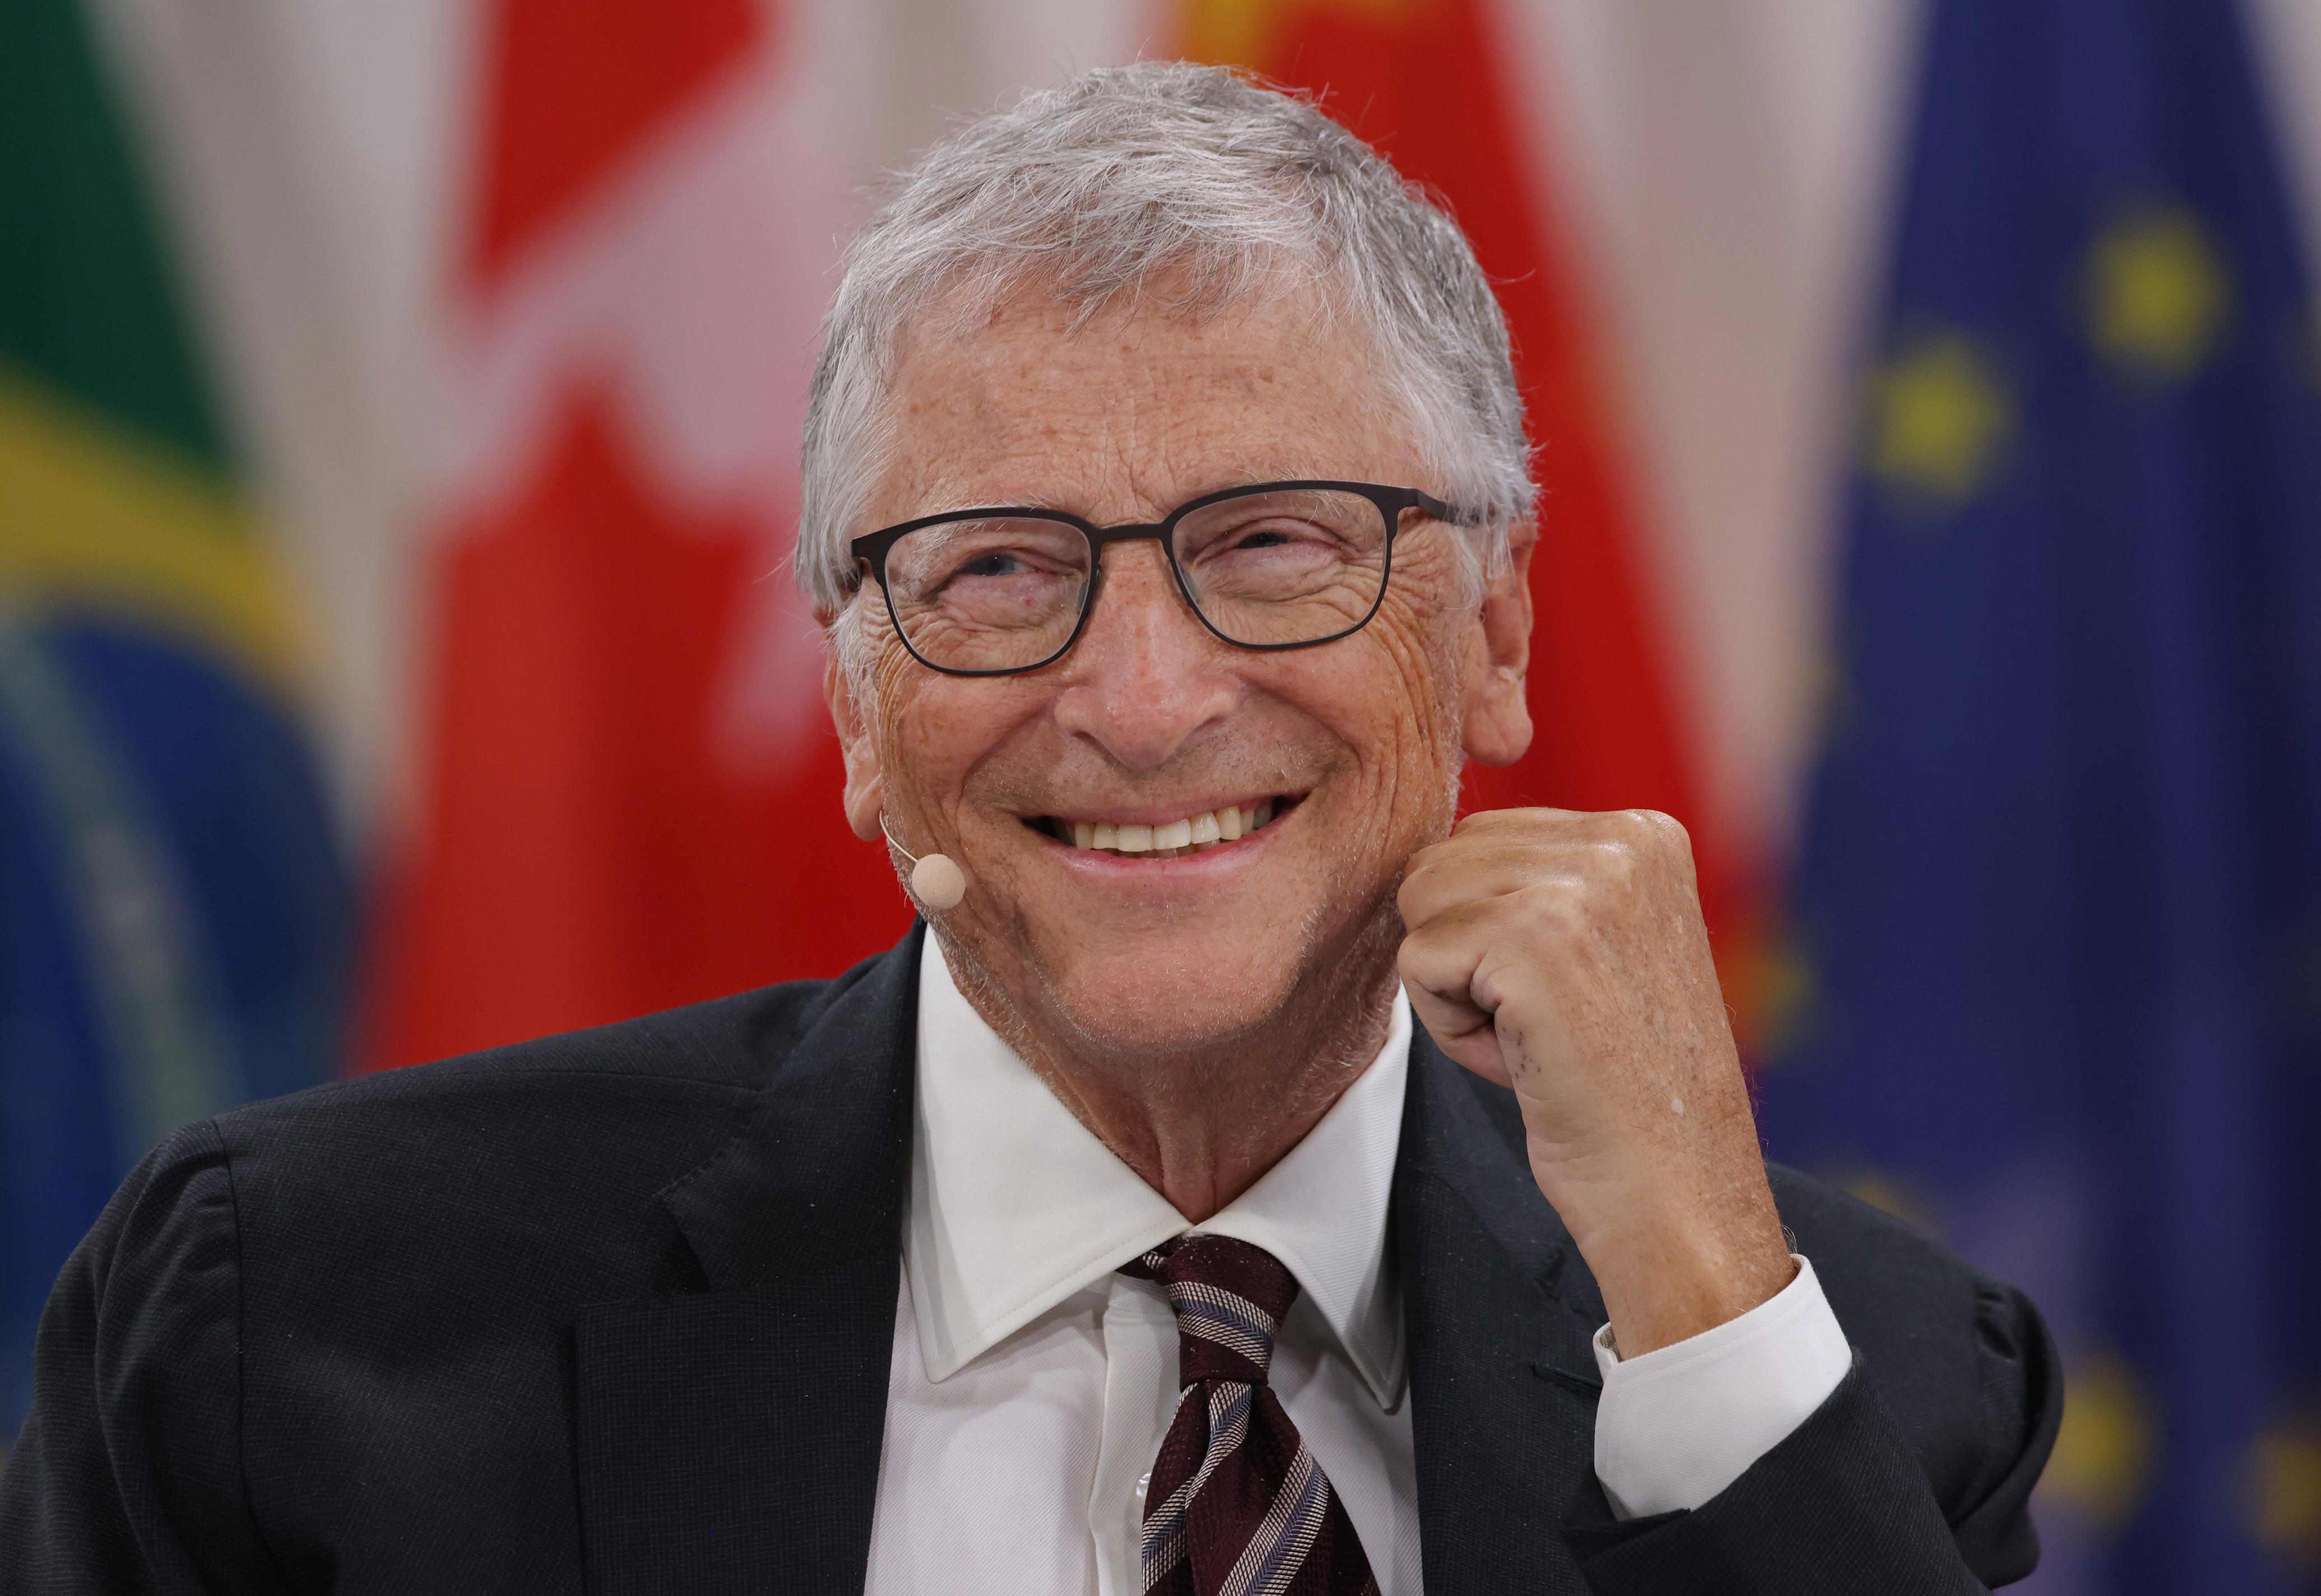 <ul class="summary-list"><li>Bill Gates unveiled his annual summer read and watch list.</li><li>Gates said the four books and one TV show all "touch on the idea of service to others."</li><li>"Slow Horses," a British spy thriller series on Apple TV+, made the list.</li></ul><p><a class="editor-rtfLink" href="https://www.businessinsider.com/how-bill-gates-spends-fortune">Bill Gates</a> unveiled his annual summer reading and TV list, saying this year is all about altruism.</p><p>Gates shared his recommendations in a <a class="editor-rtfLink" href="https://www.gatesnotes.com/Summer-Books-2024">blog post</a>. The <a class="editor-rtfLink" href="https://www.businessinsider.com/why-bill-gates-reads-50-books-a-year-2015-11">Microsoft cofounder</a> says he reads about 50 books a year.</p><p>"The books and TV series on my summer list all touch on the idea of service to others — why we do it, the things that can make it difficult, and why we should do it anyway," Gates wrote.</p><p>The Microsoft cofounder wrote that he didn't intend to center the list around service, but it's "certainly as relevant today as ever."</p><p>"At a time when wars dominate the headlines and our politics is becoming more and more polarized, it's inspiring to appreciate those who help others and think about how we can be more generous in our own lives," he wrote.</p><p>Here are the four books and one TV series that Gates said will enrich your summer.</p><div class="read-original">Read the original article on <a href="https://www.businessinsider.com/bill-gates-2024-summer-reading-and-watching-book-tv-list-2024-5">Business Insider</a></div>